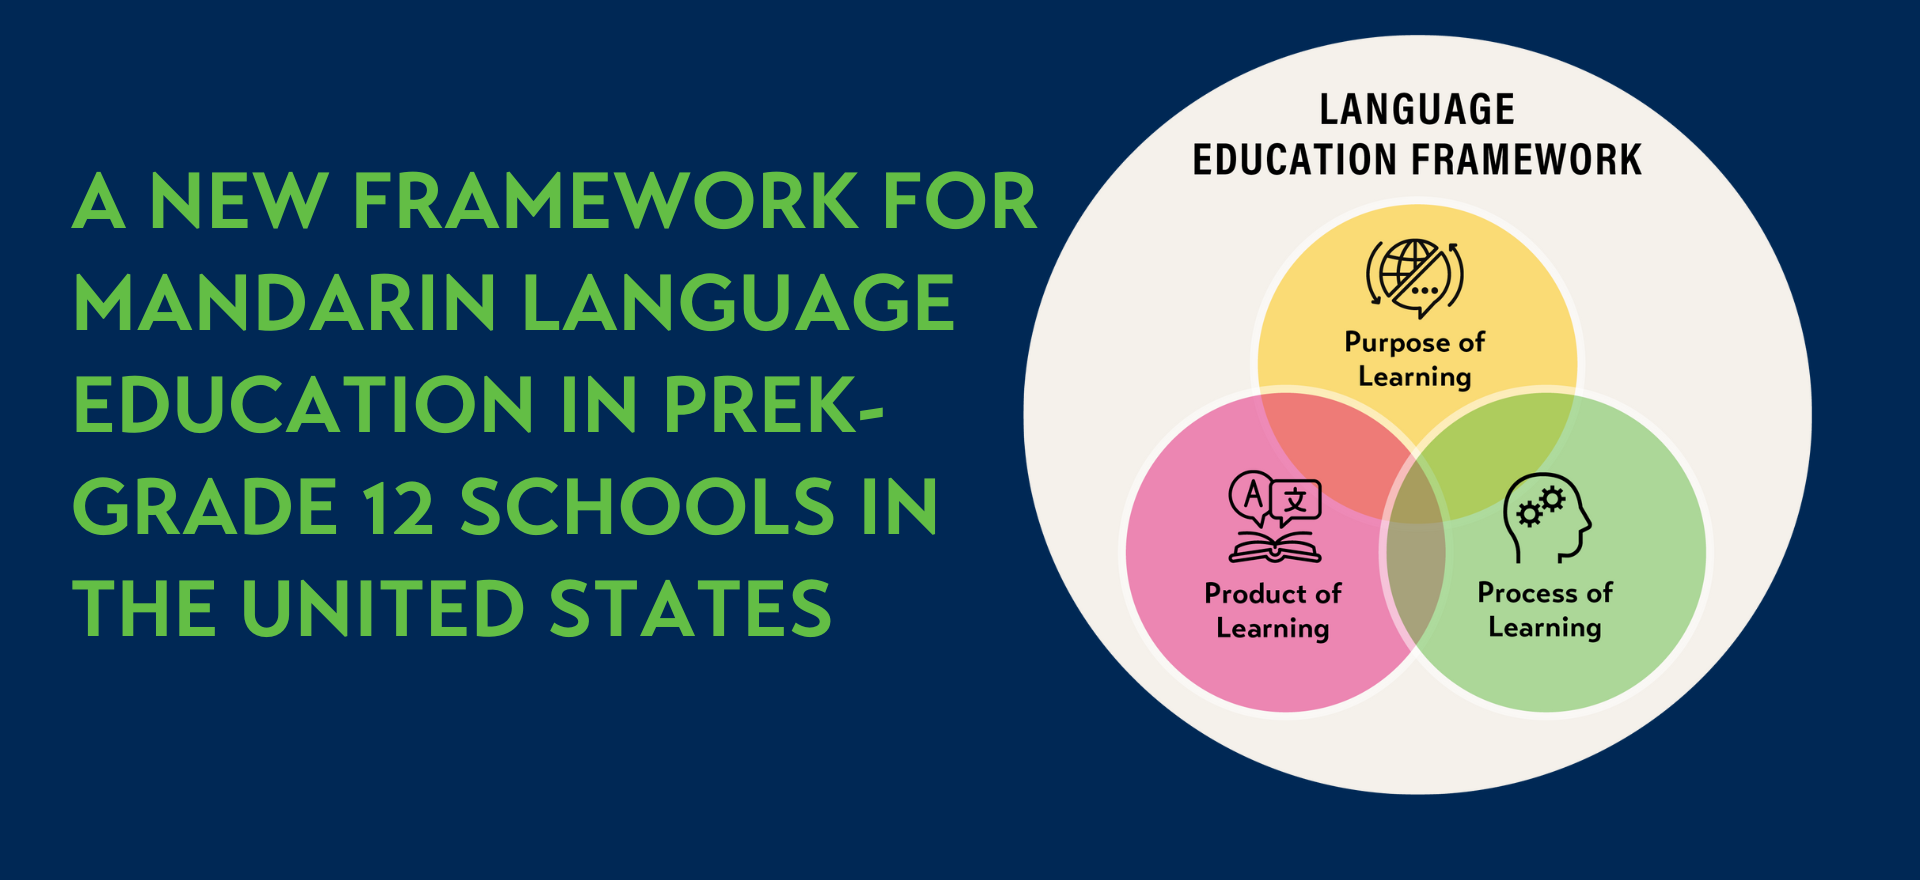 The New Framework for Mandarin Language Education in PreK-Grade 12 Schools in the United States